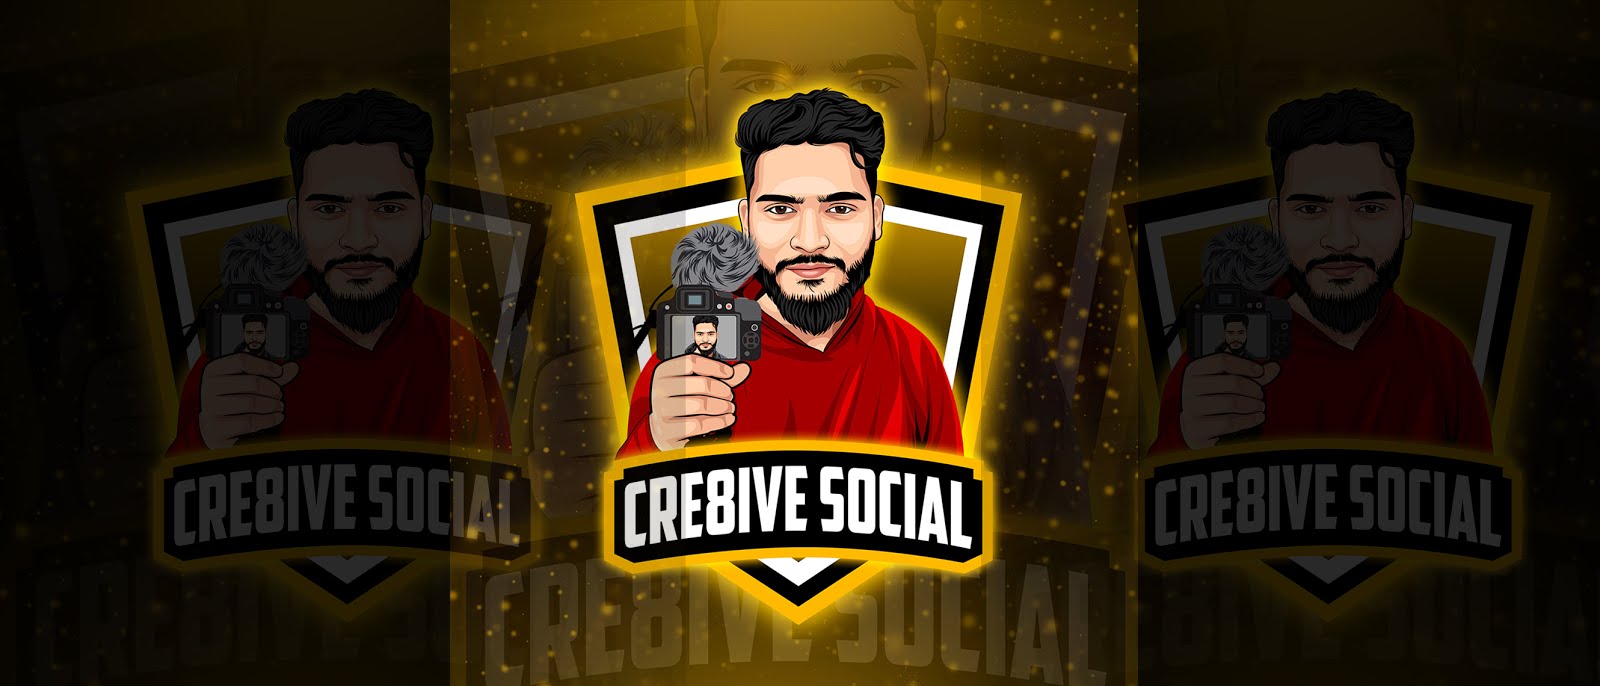 Cre8ive social